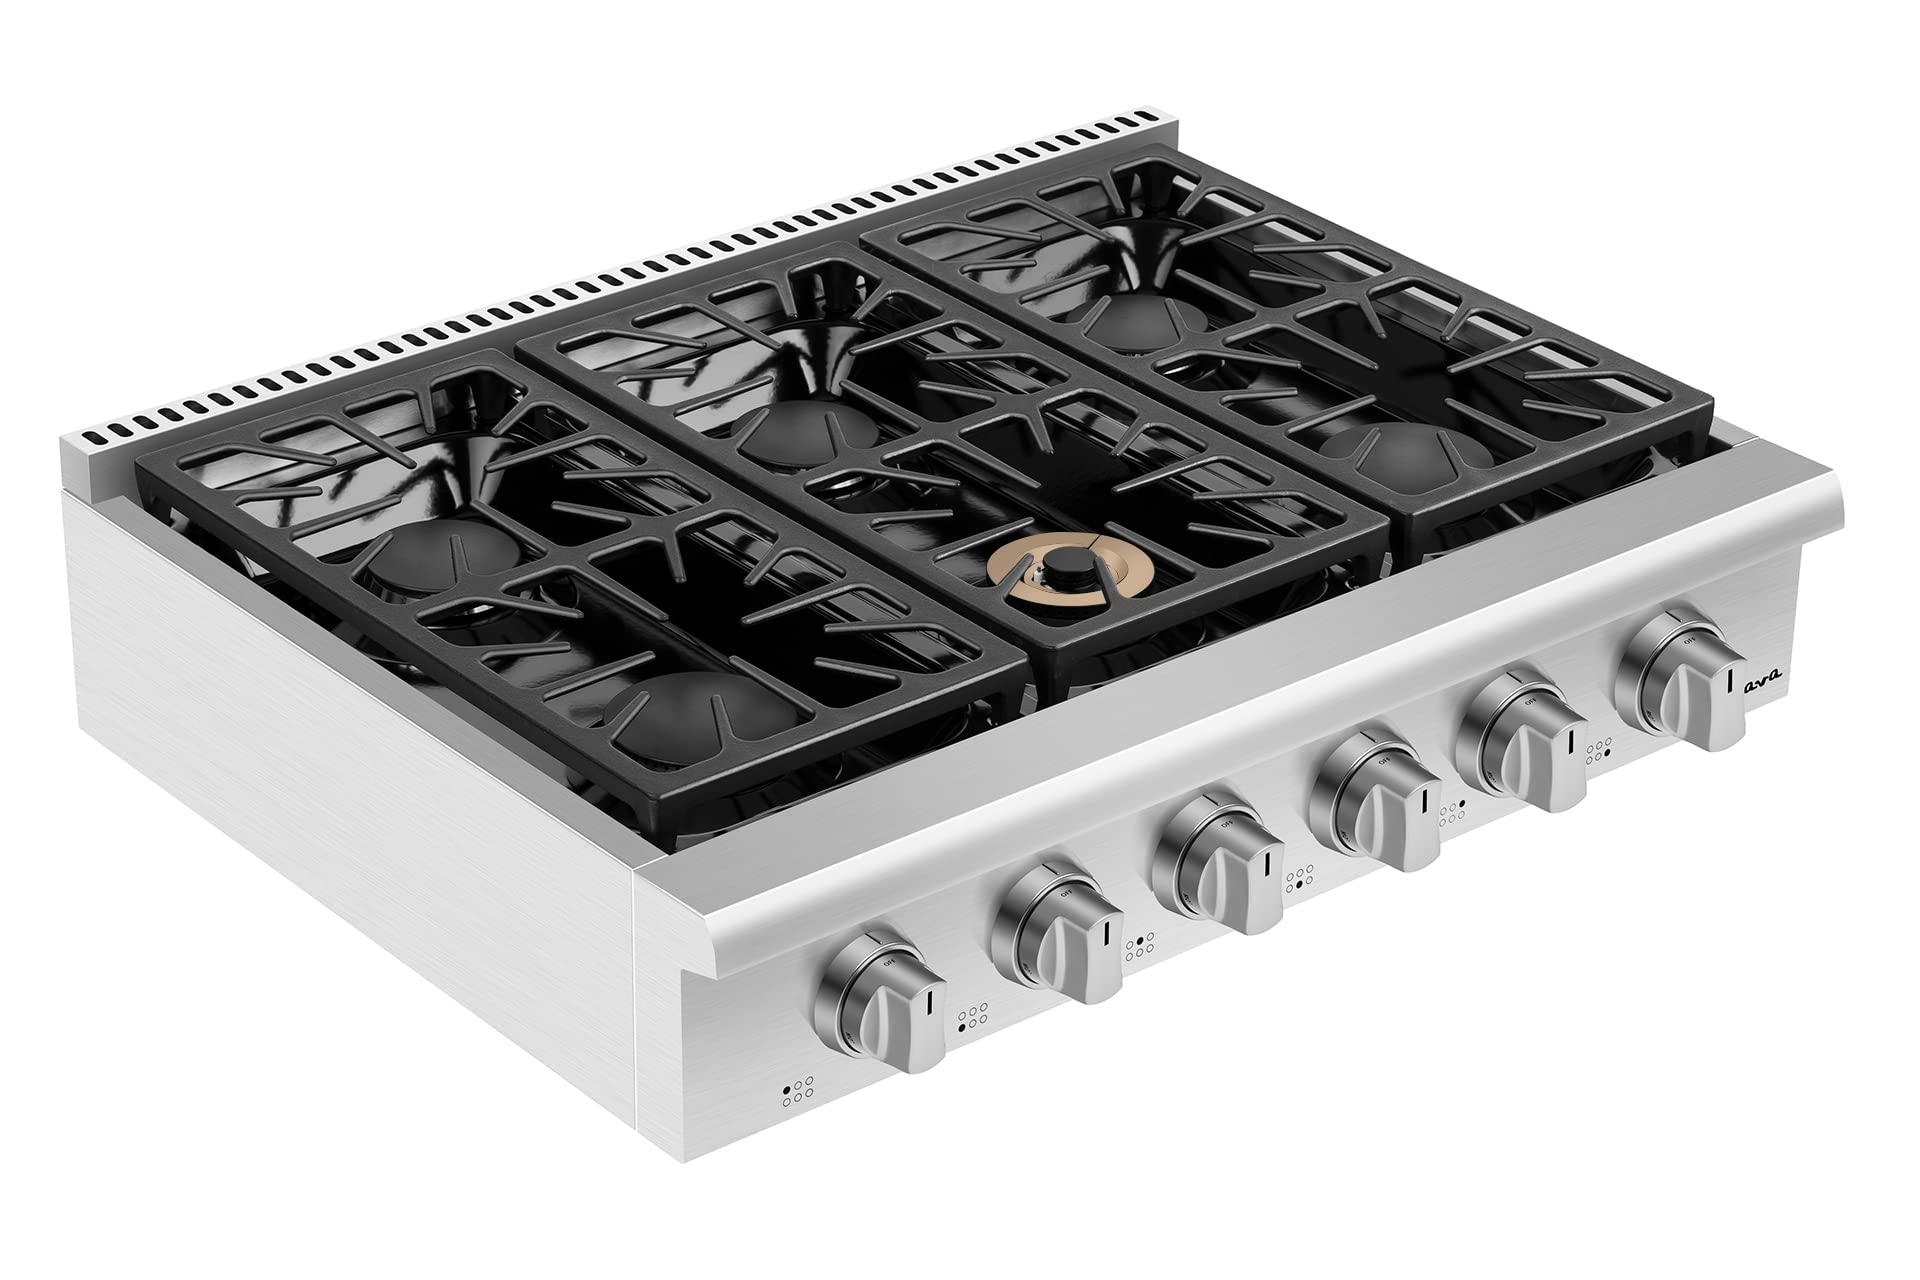 Empava 36 in. Pro-Style Professional Slide-in Natural Gas Rangetop with 6 Deep Recessed Sealed Ultra High-Low Burners-Heavy Duty Continuous Grates in Stainless Steel, 36 Inch, Silver